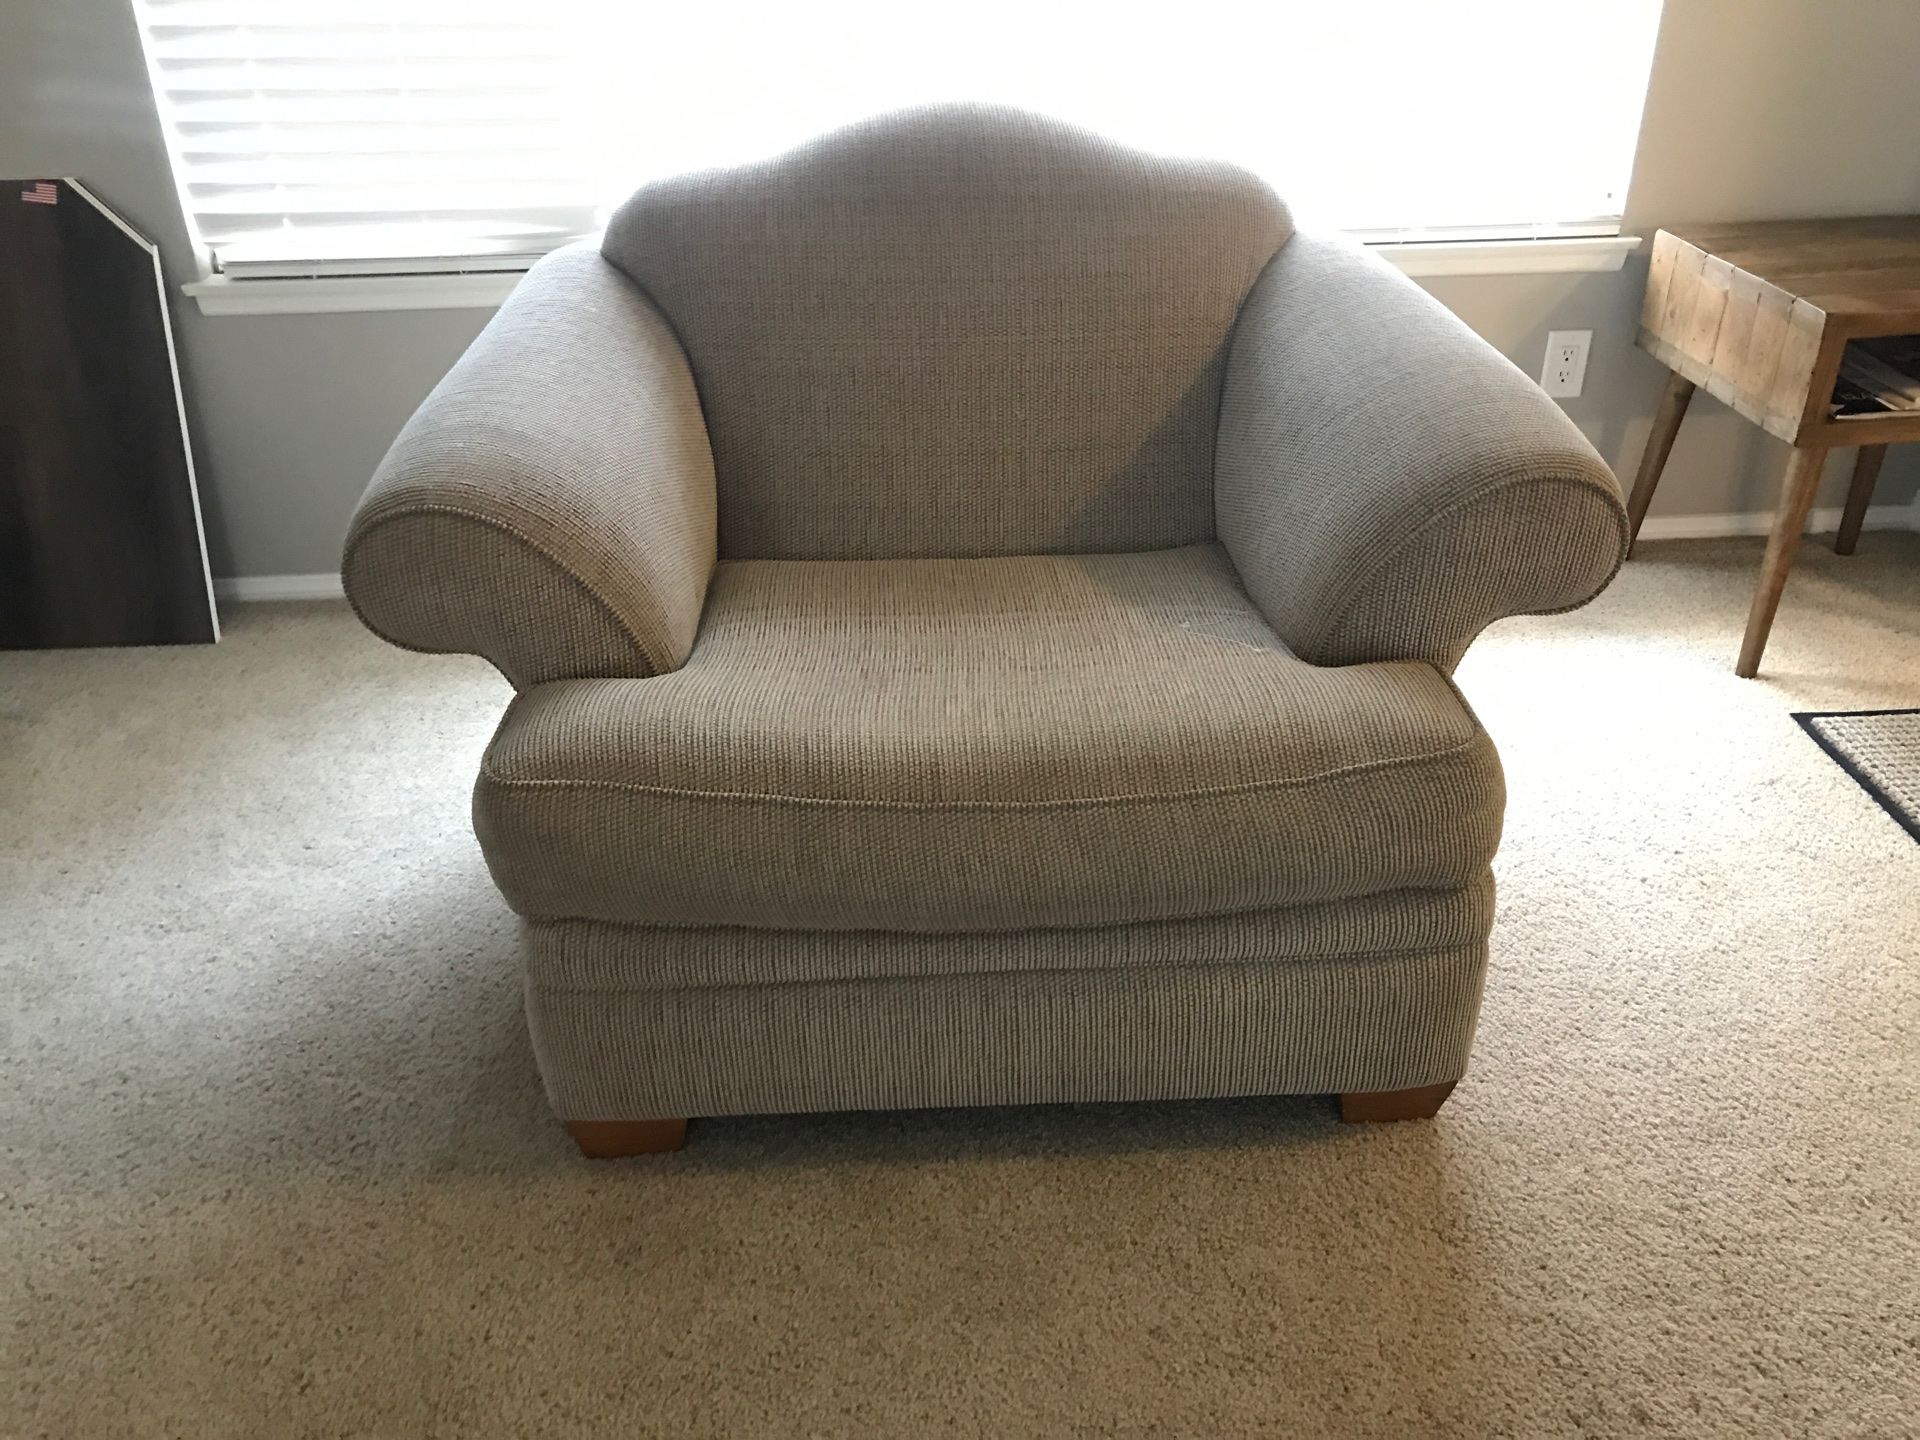 FREE Large chair